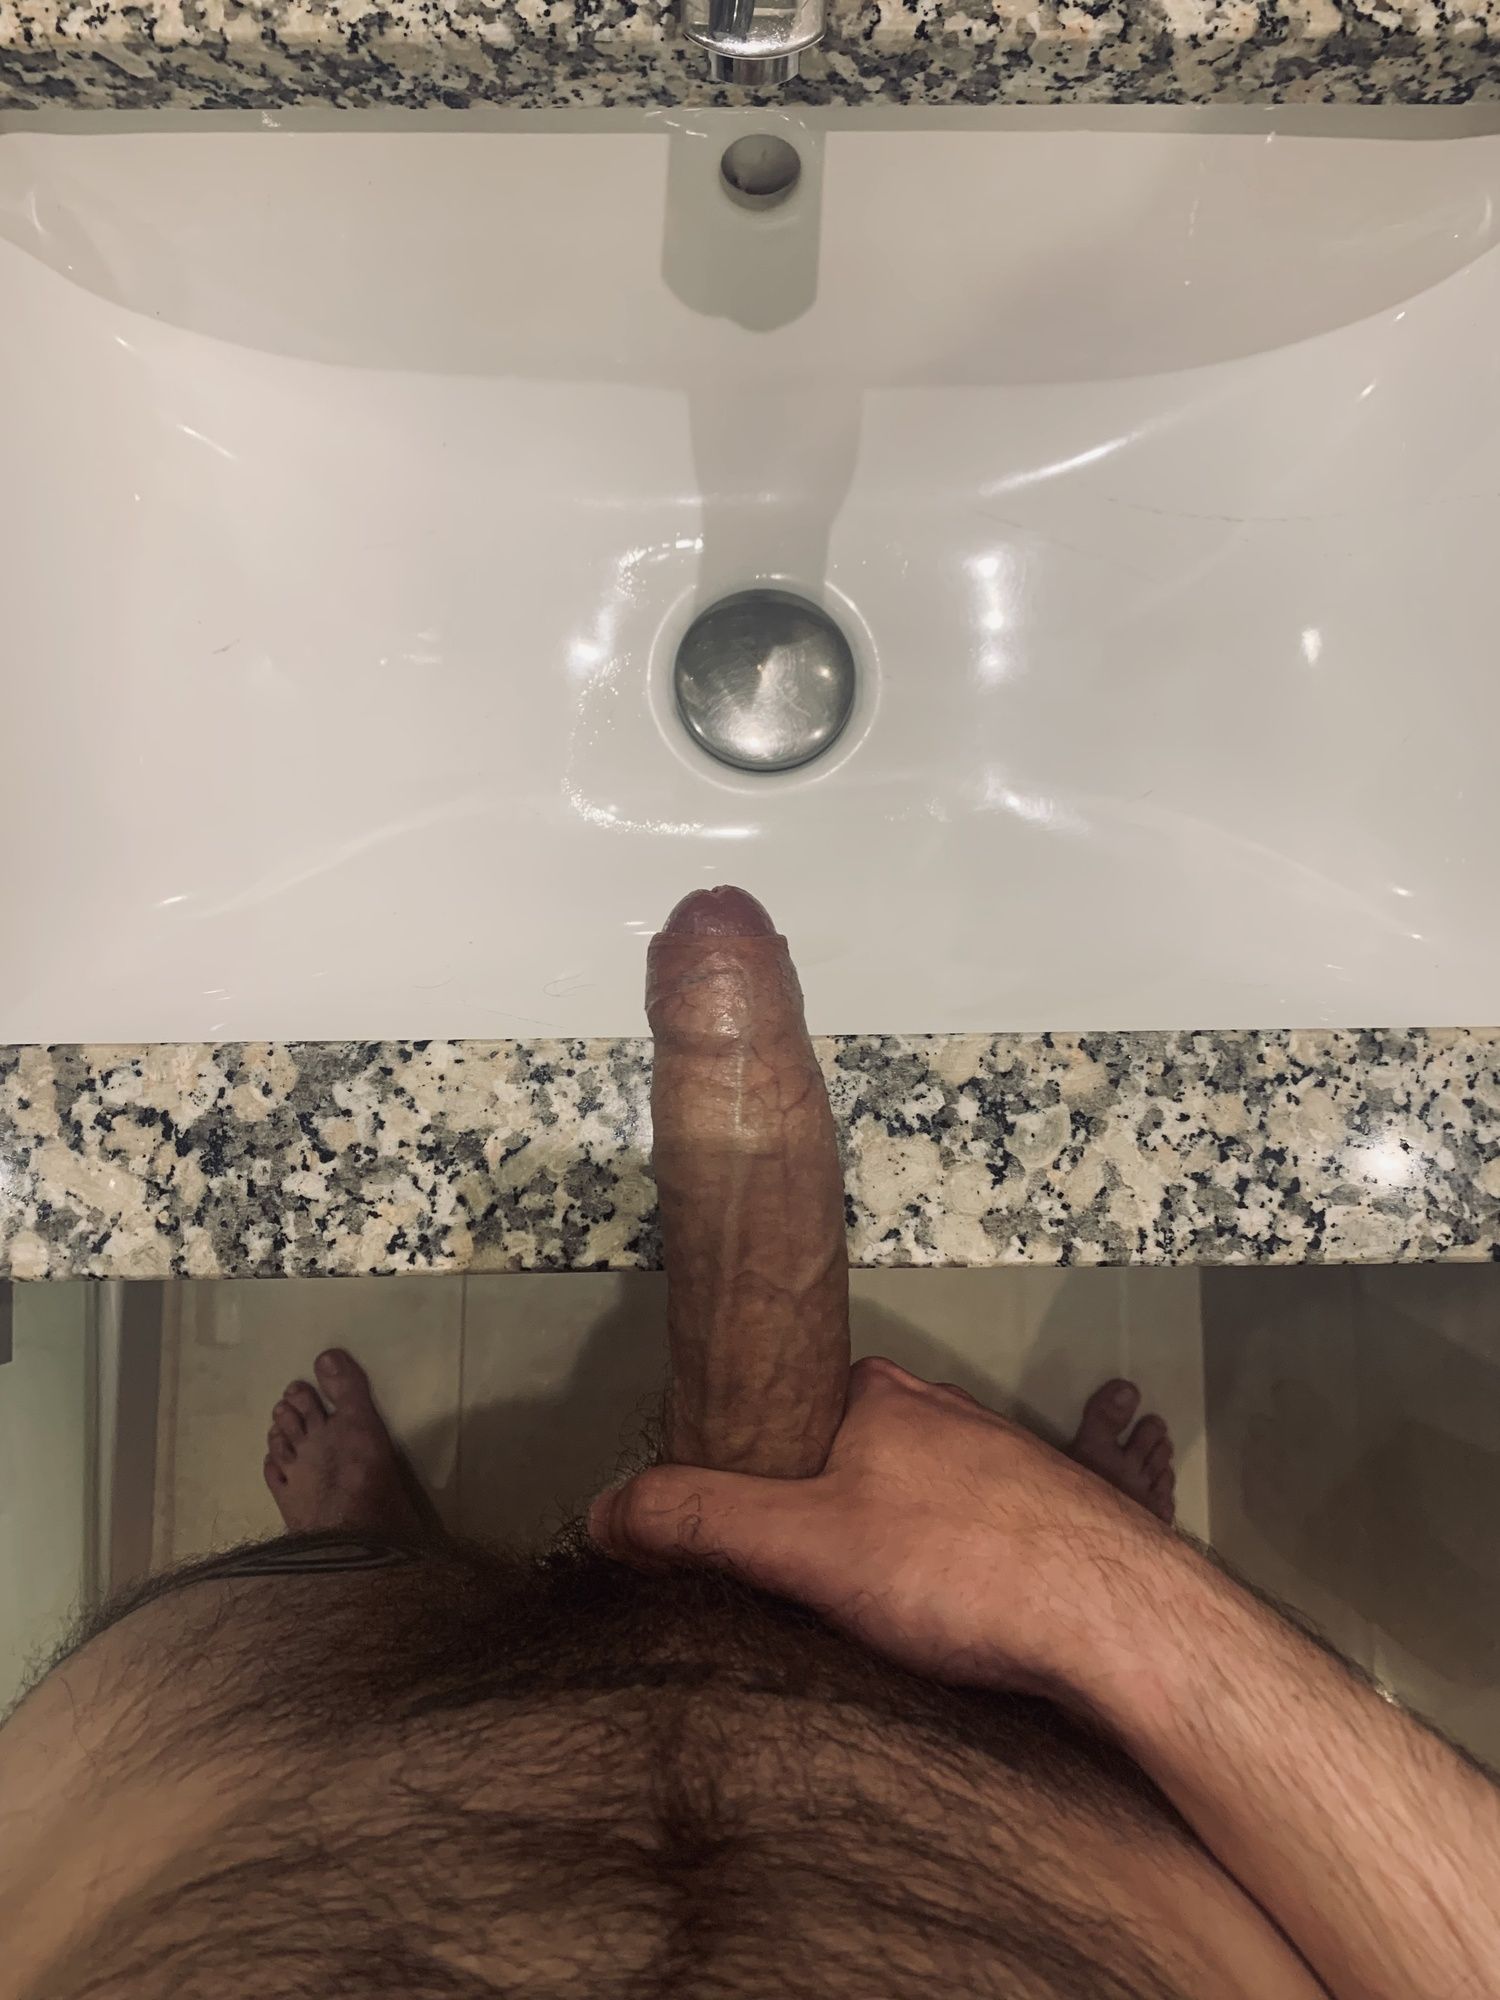 Naked in the hotel bathroom